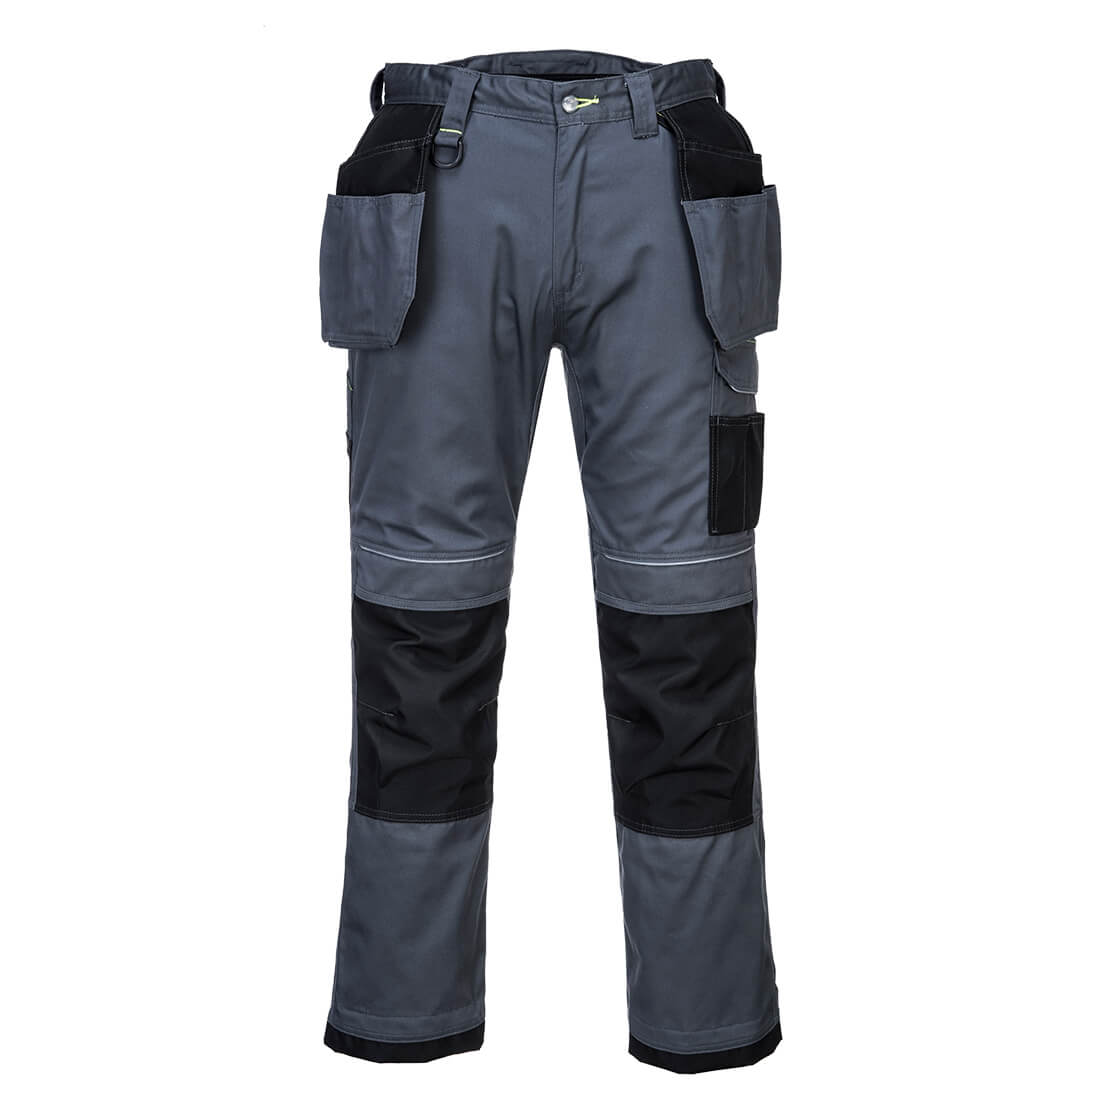 Portwest PW3 Stretch Holster Work Trouser